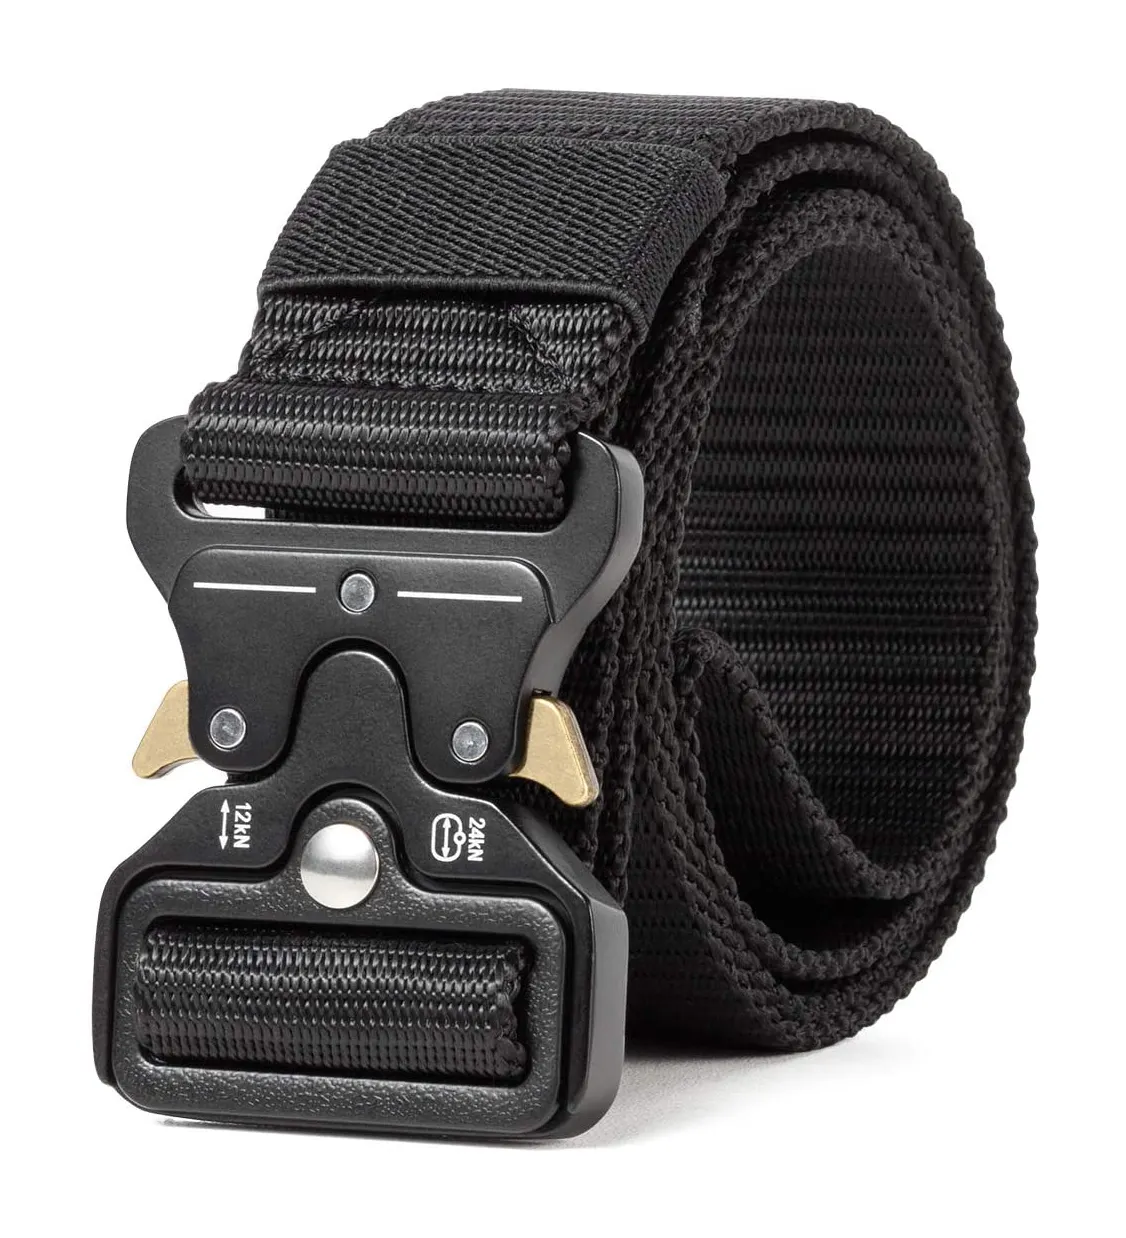 Style Riggers Web Waist Tactical Molle Nylon Belt with Heavy Duty Quick Release Zinc Alloy Buckle